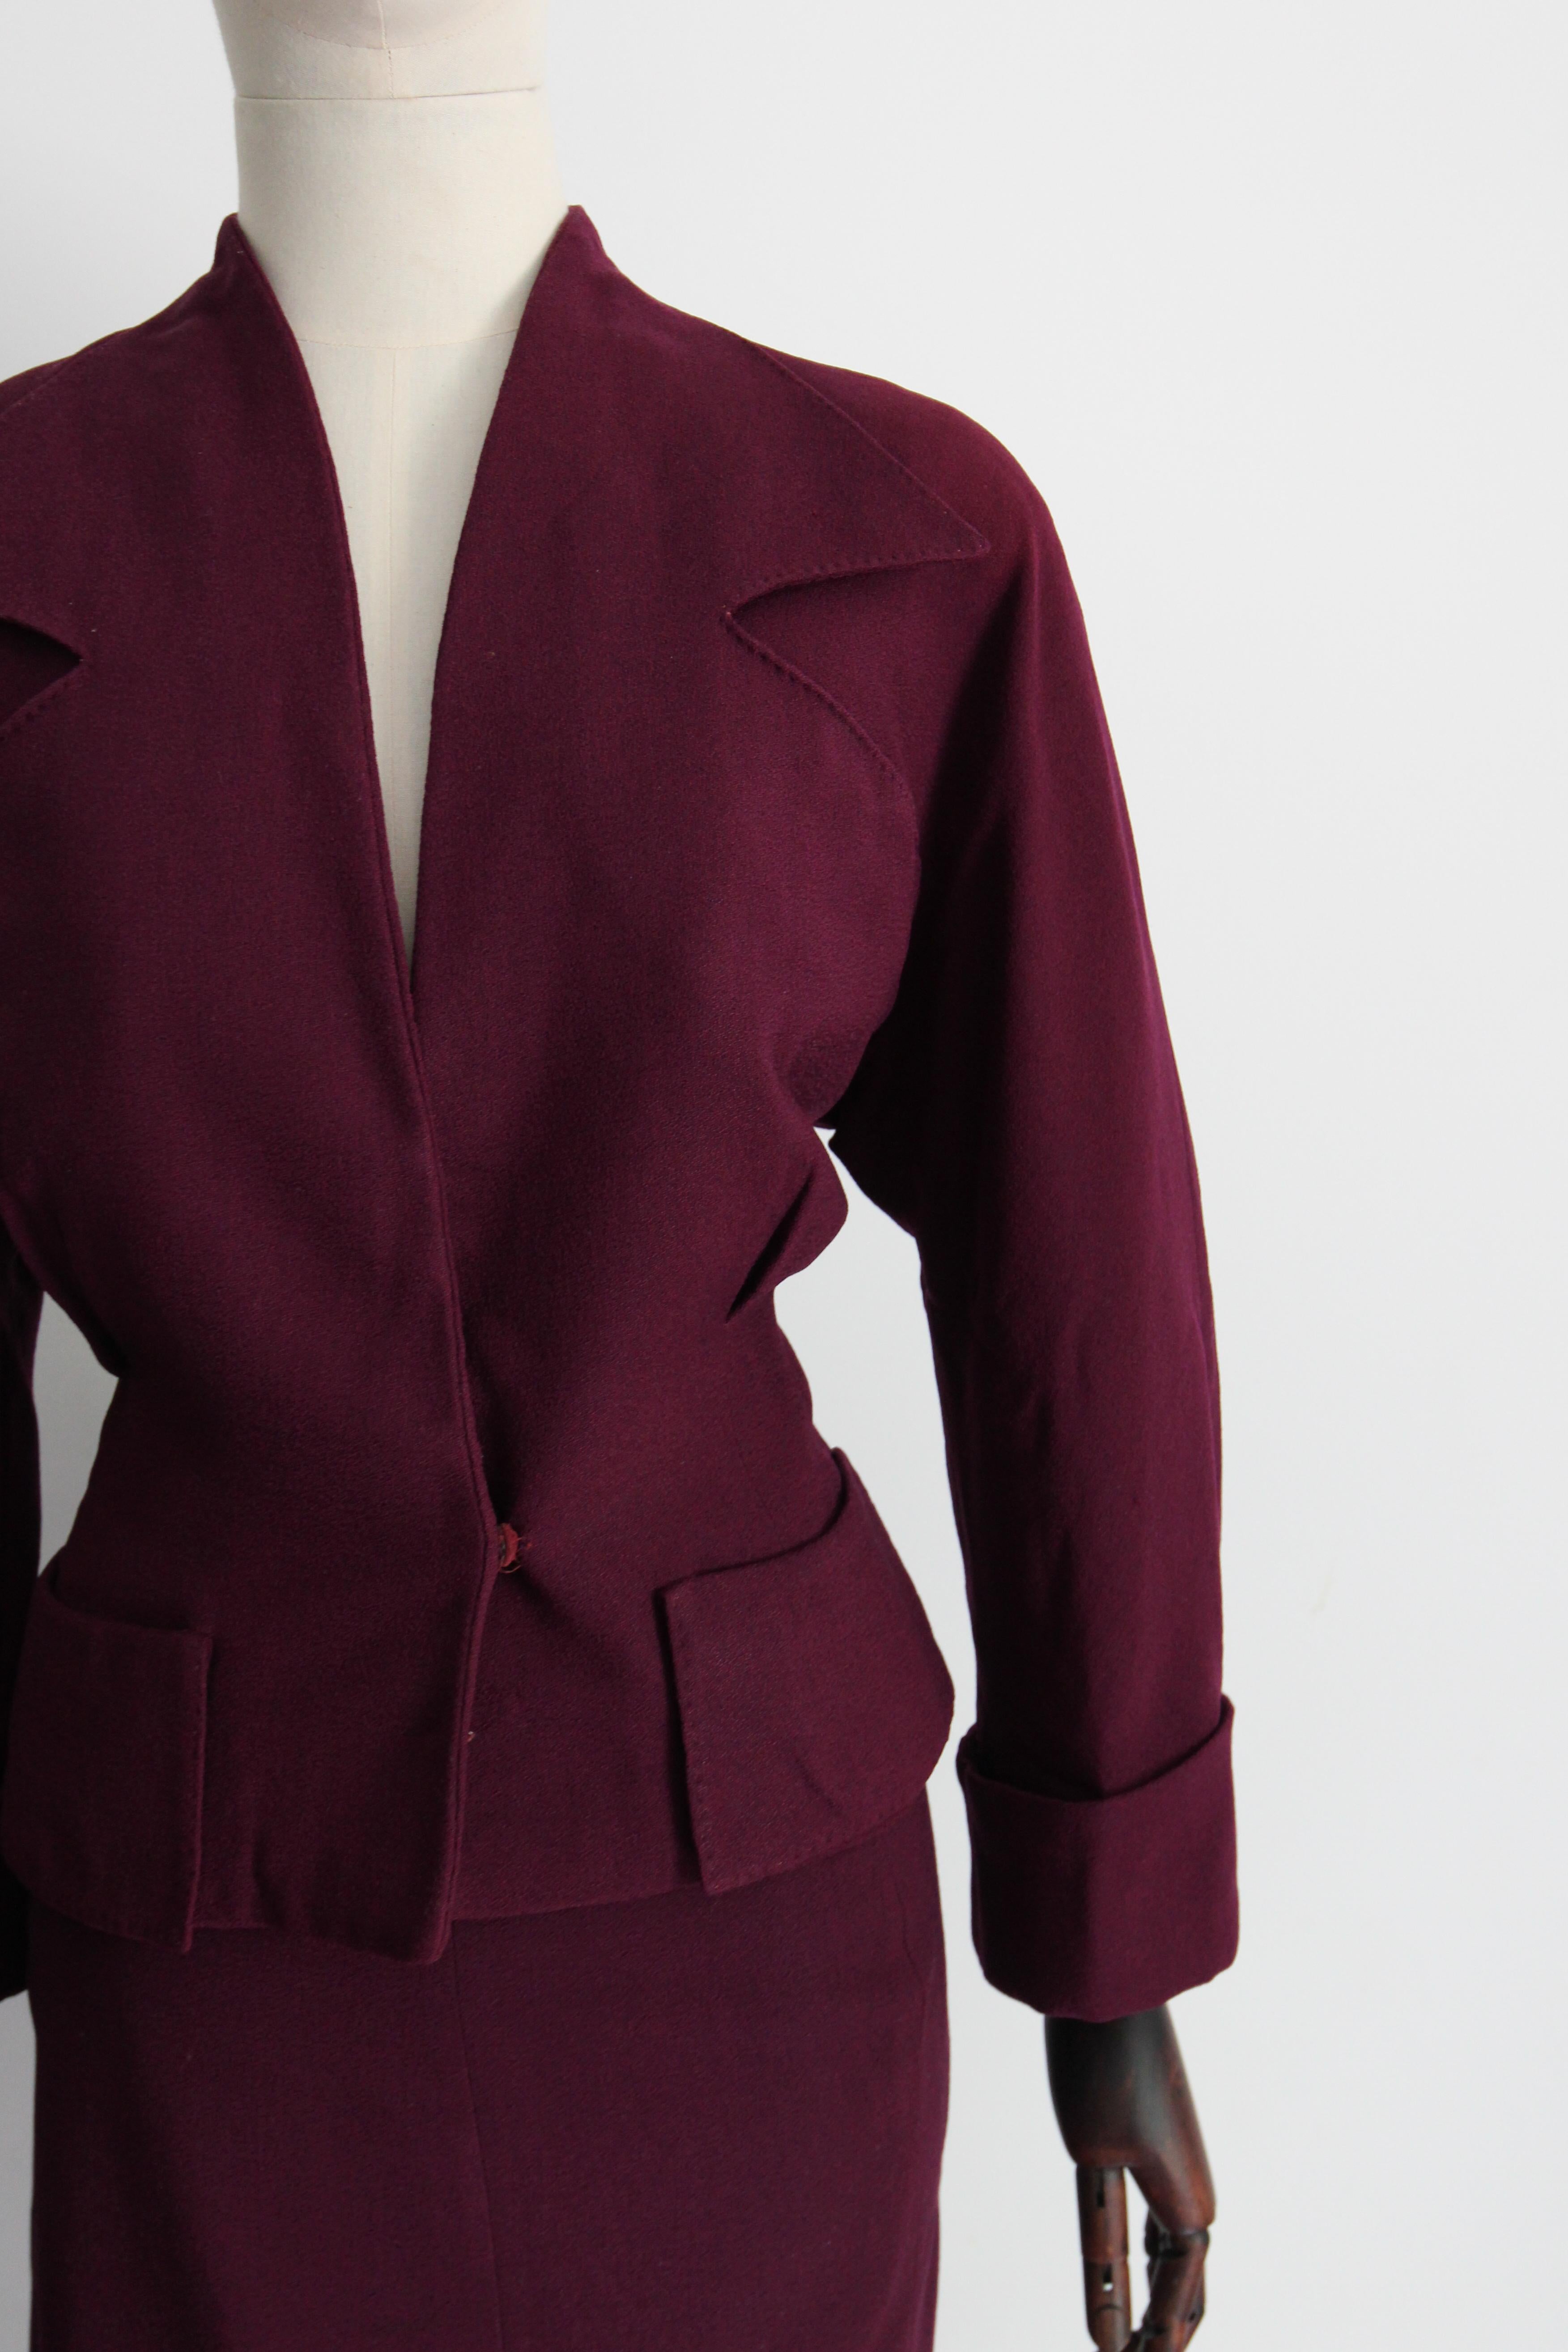 Vintage 1940's plum wool crepe skirt suit tailored burgundy suit UK 8-10 US 4-6 In Good Condition For Sale In Cheltenham, GB